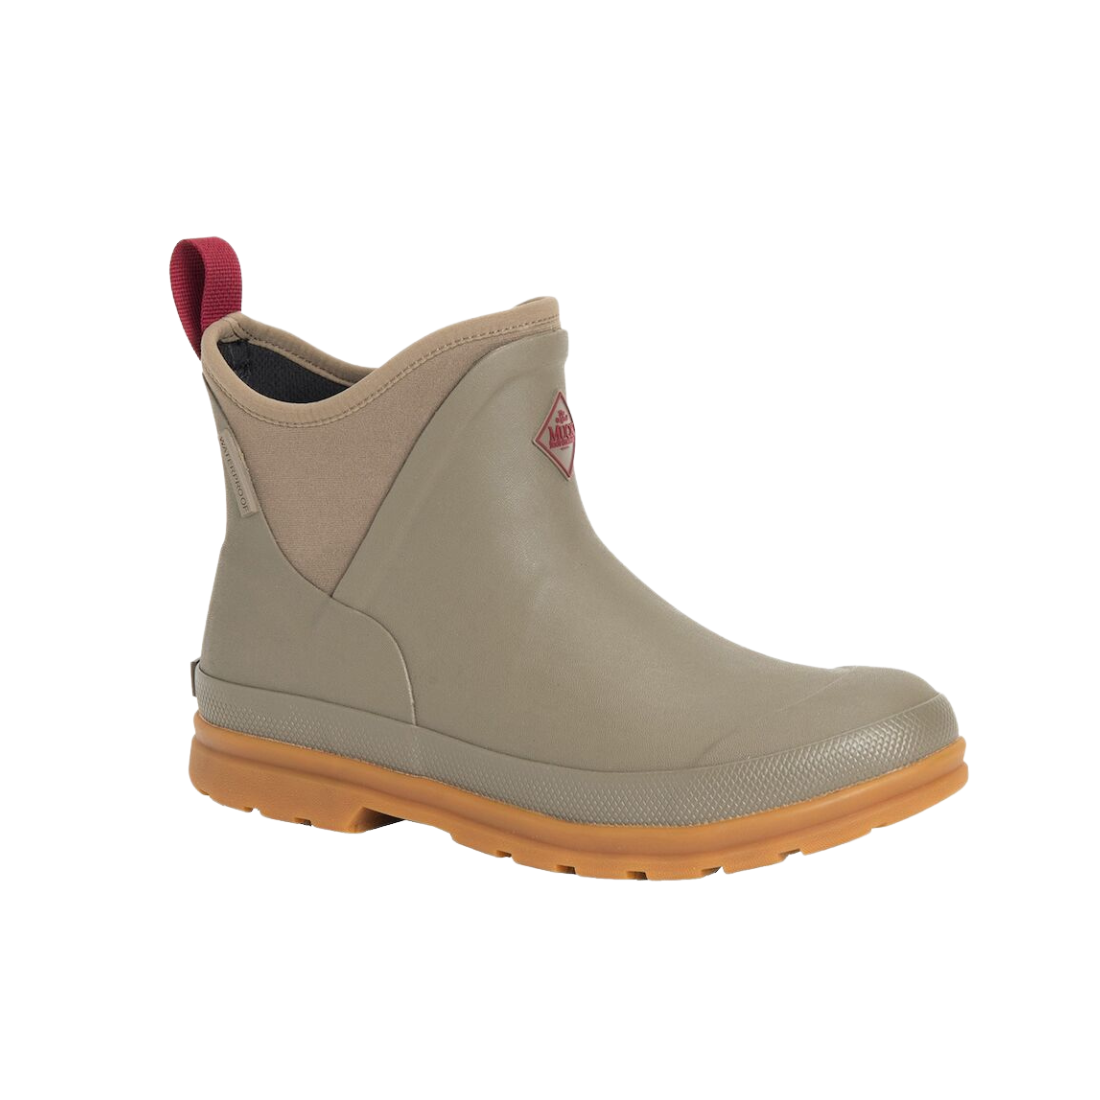 Womens Originals Waterproof Ankle Boot - Taupe 10 Taupe Workboots by Muck Boots | The Bloke Shop